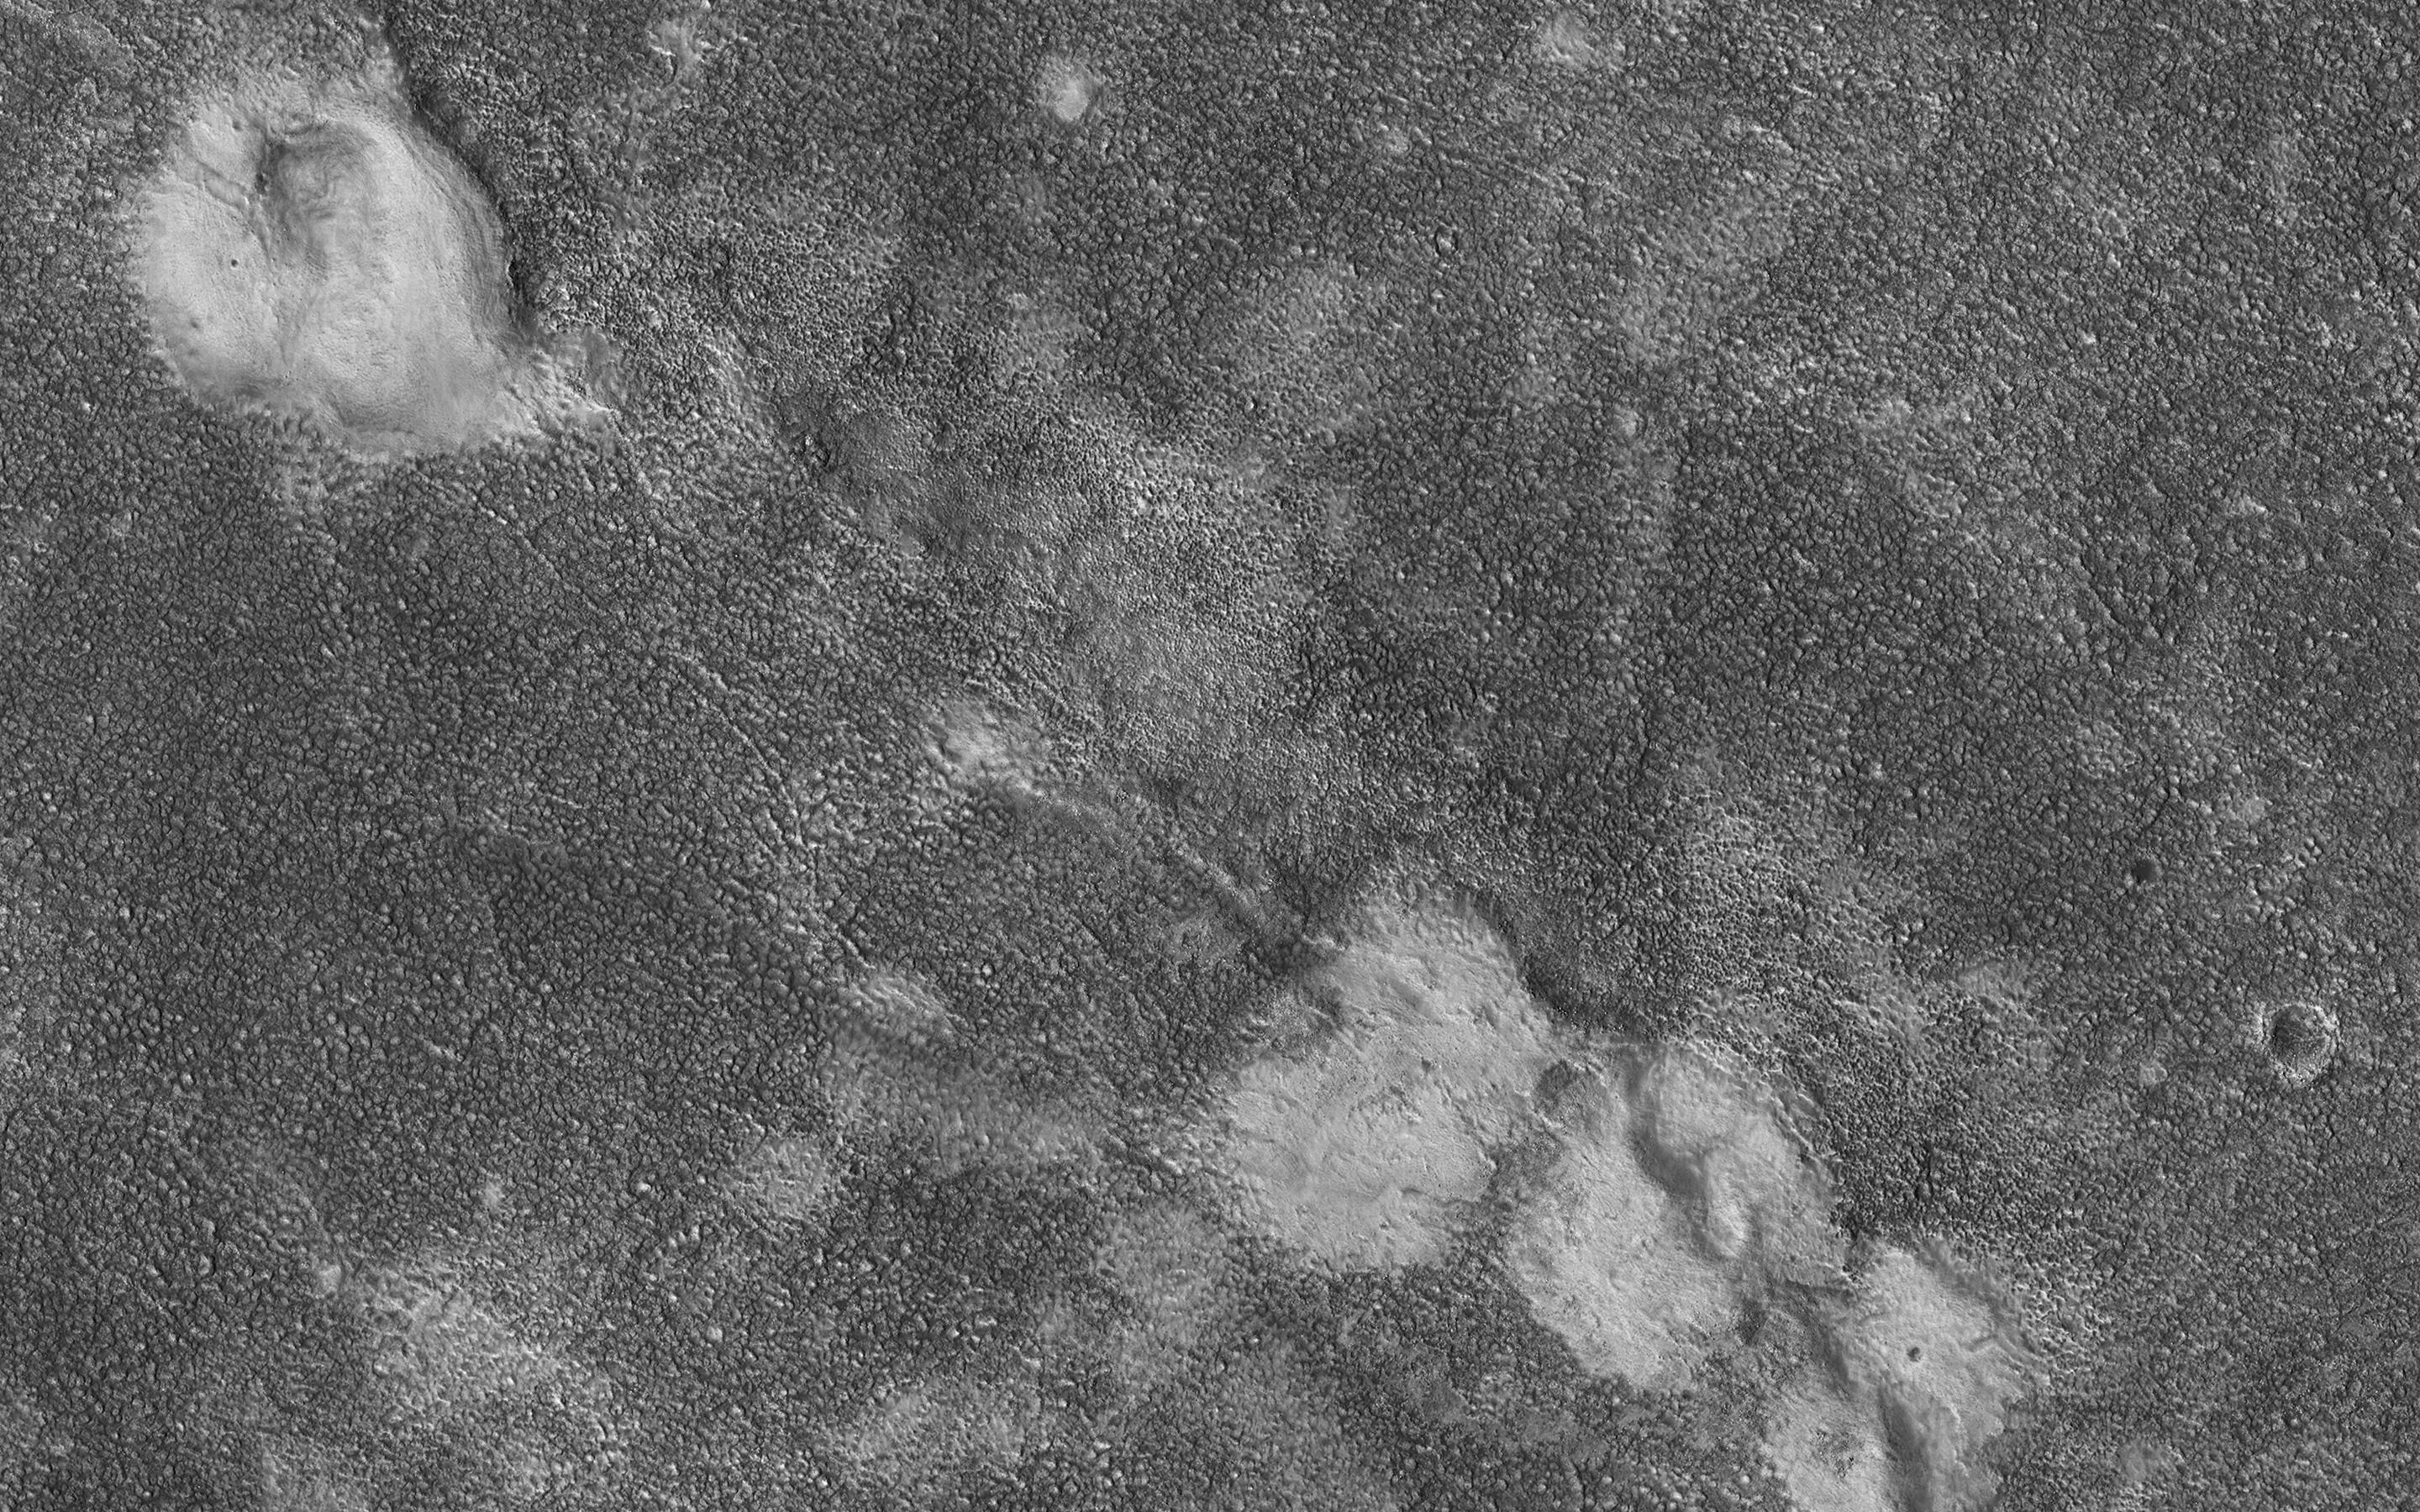 PIA23672: Mounds Cut by a Fissure